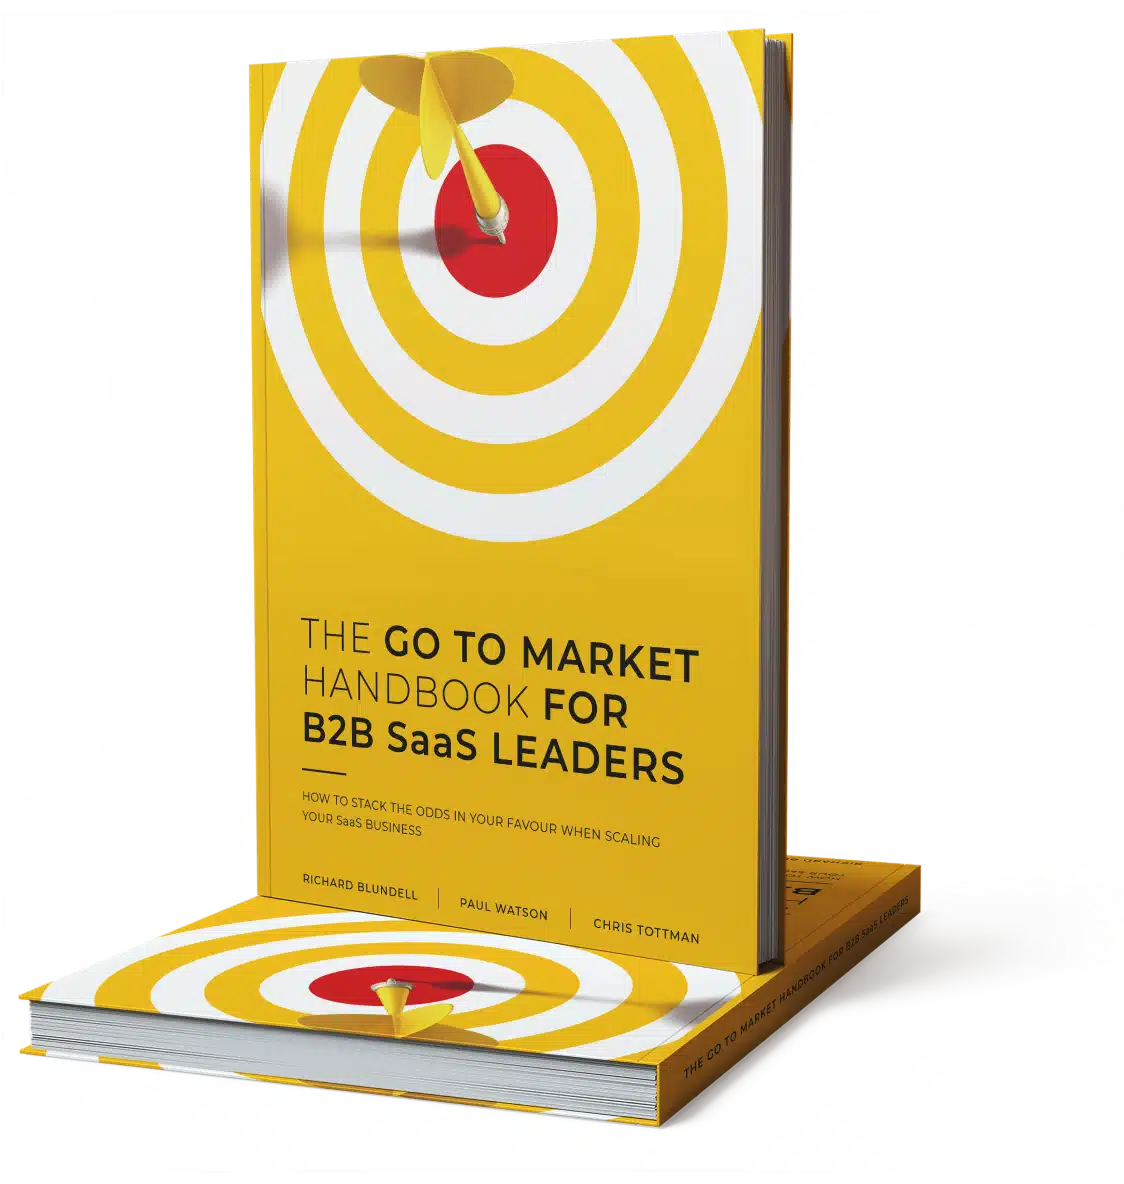 A mockup of the Go to market Handbook for B2B SaaS Leaders